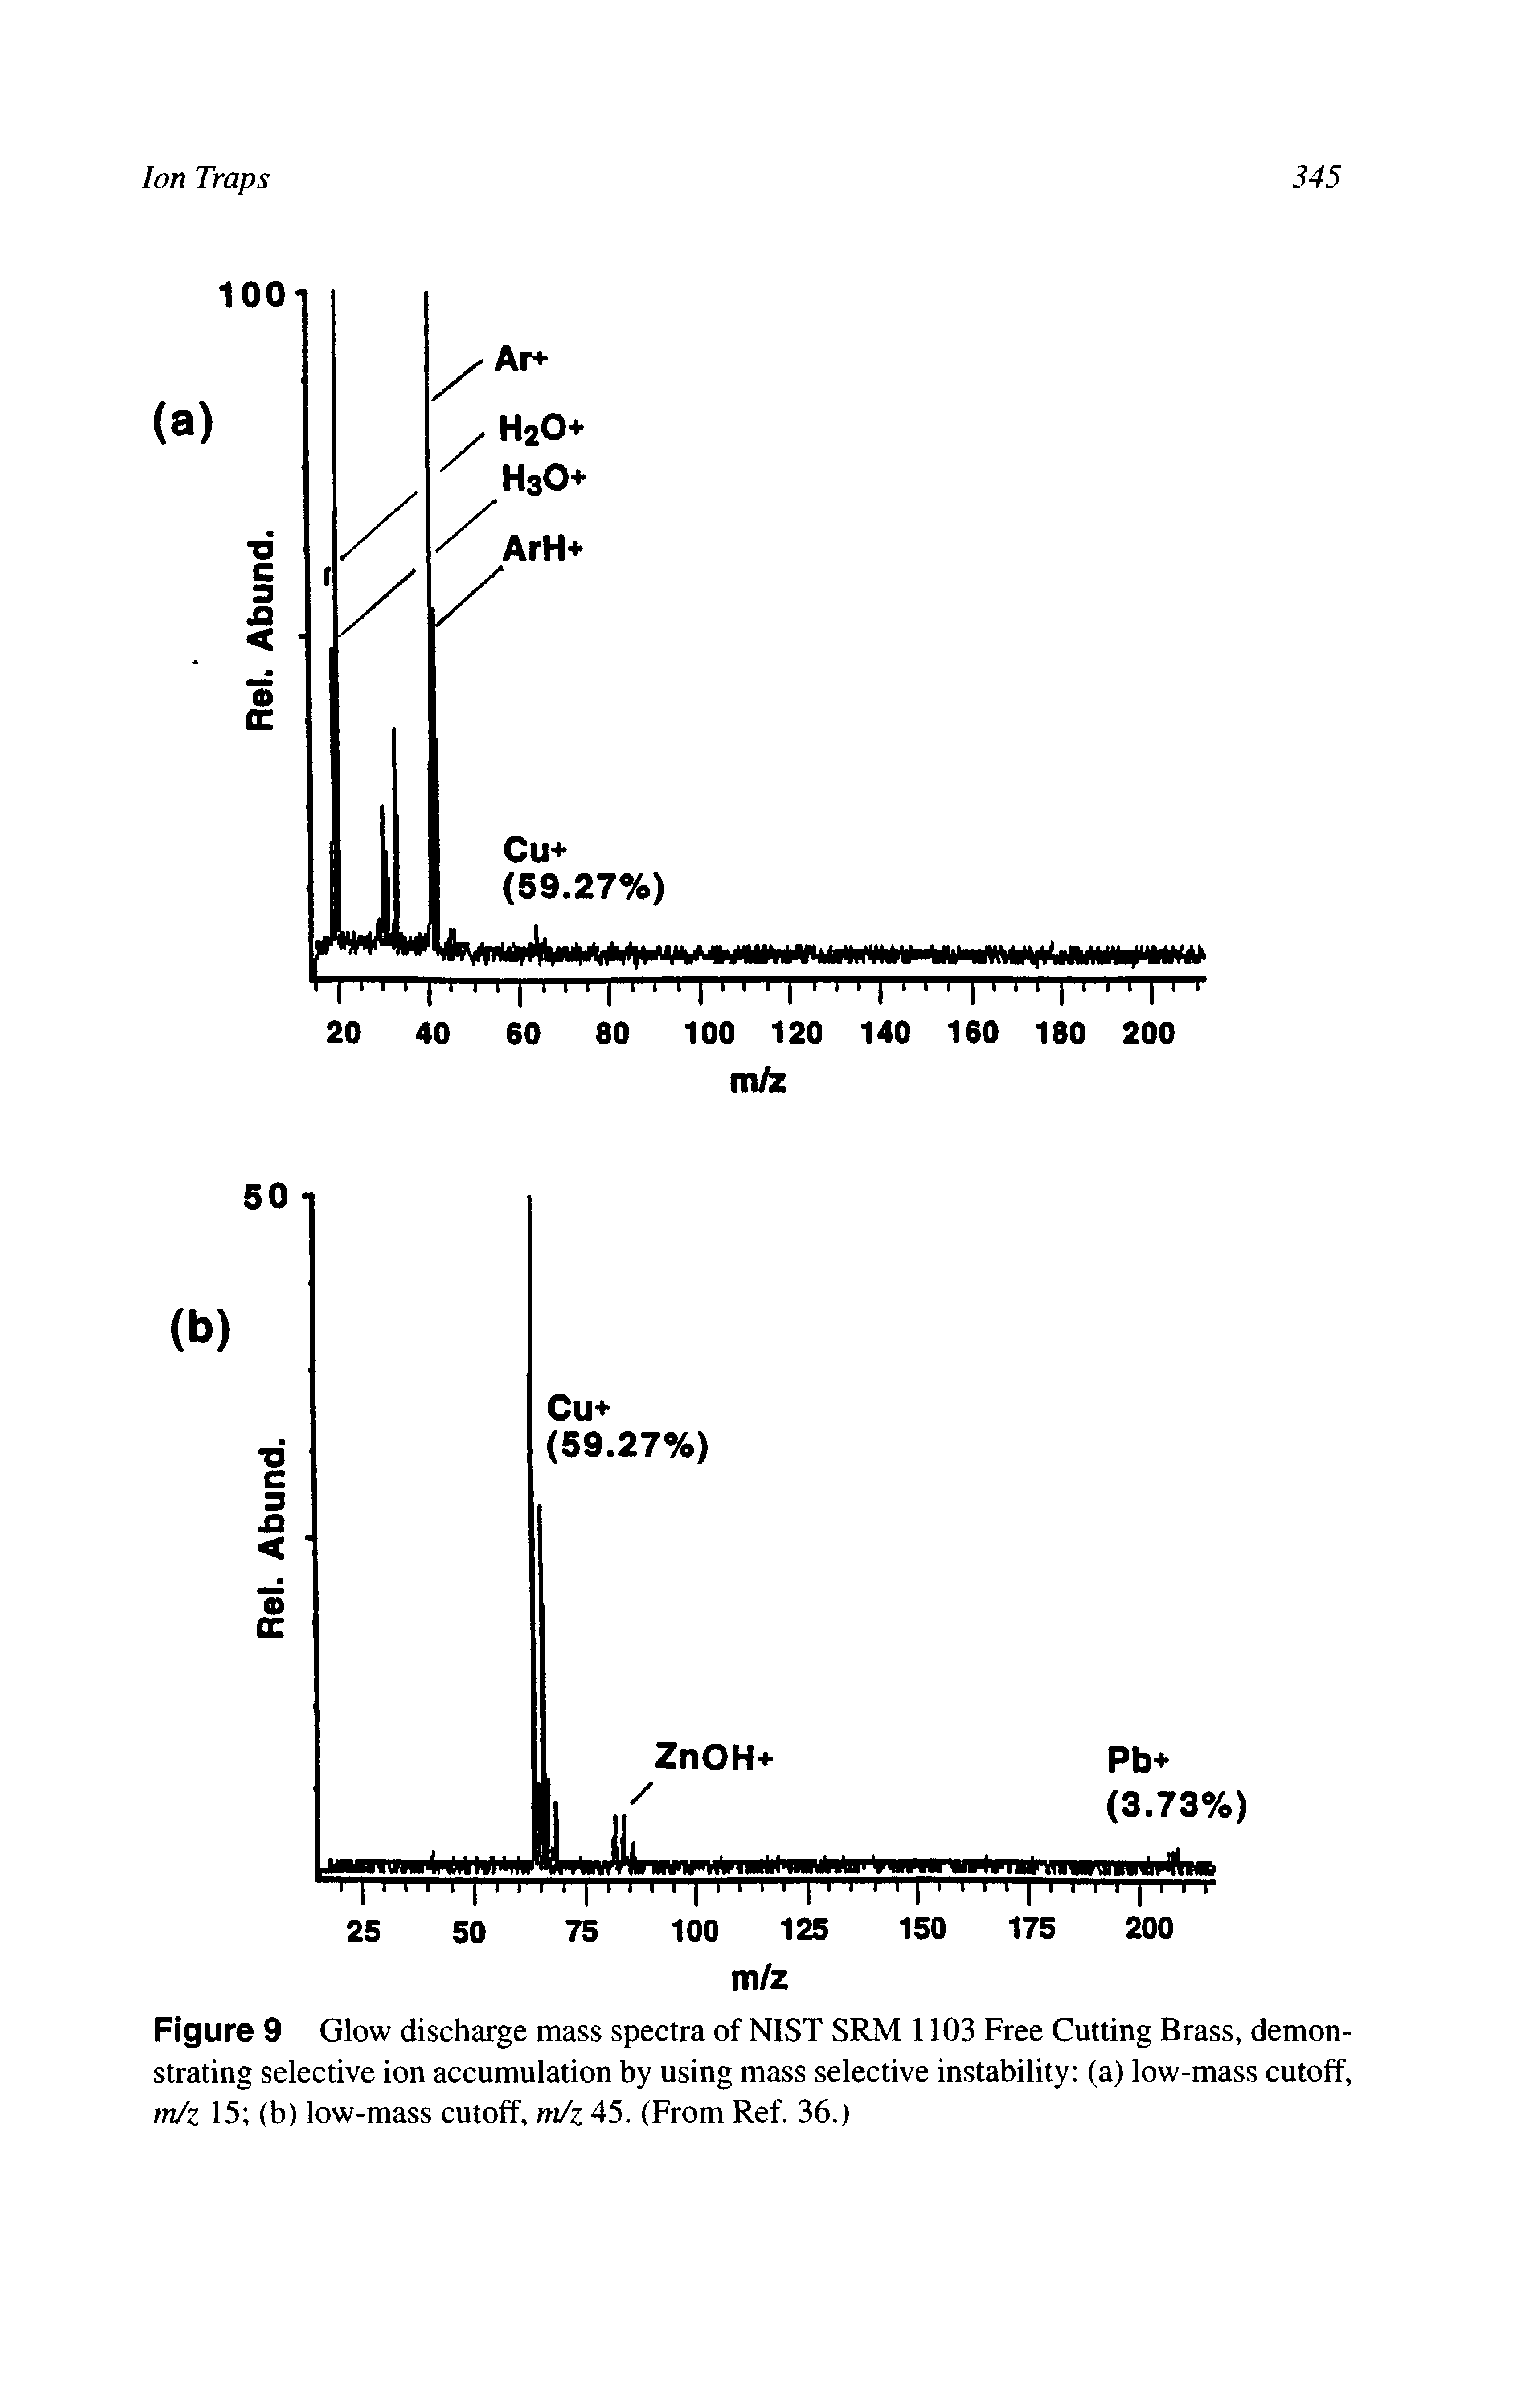 Figure 9 Glow discharge mass spectra of NIST SRM 1103 Free Cutting Brass, demonstrating selective ion accumulation by using mass selective instability (a) low-mass cutoff, m/z 15 (b) low-mass cutoff, m/z 45. (From Ref. 36.)...